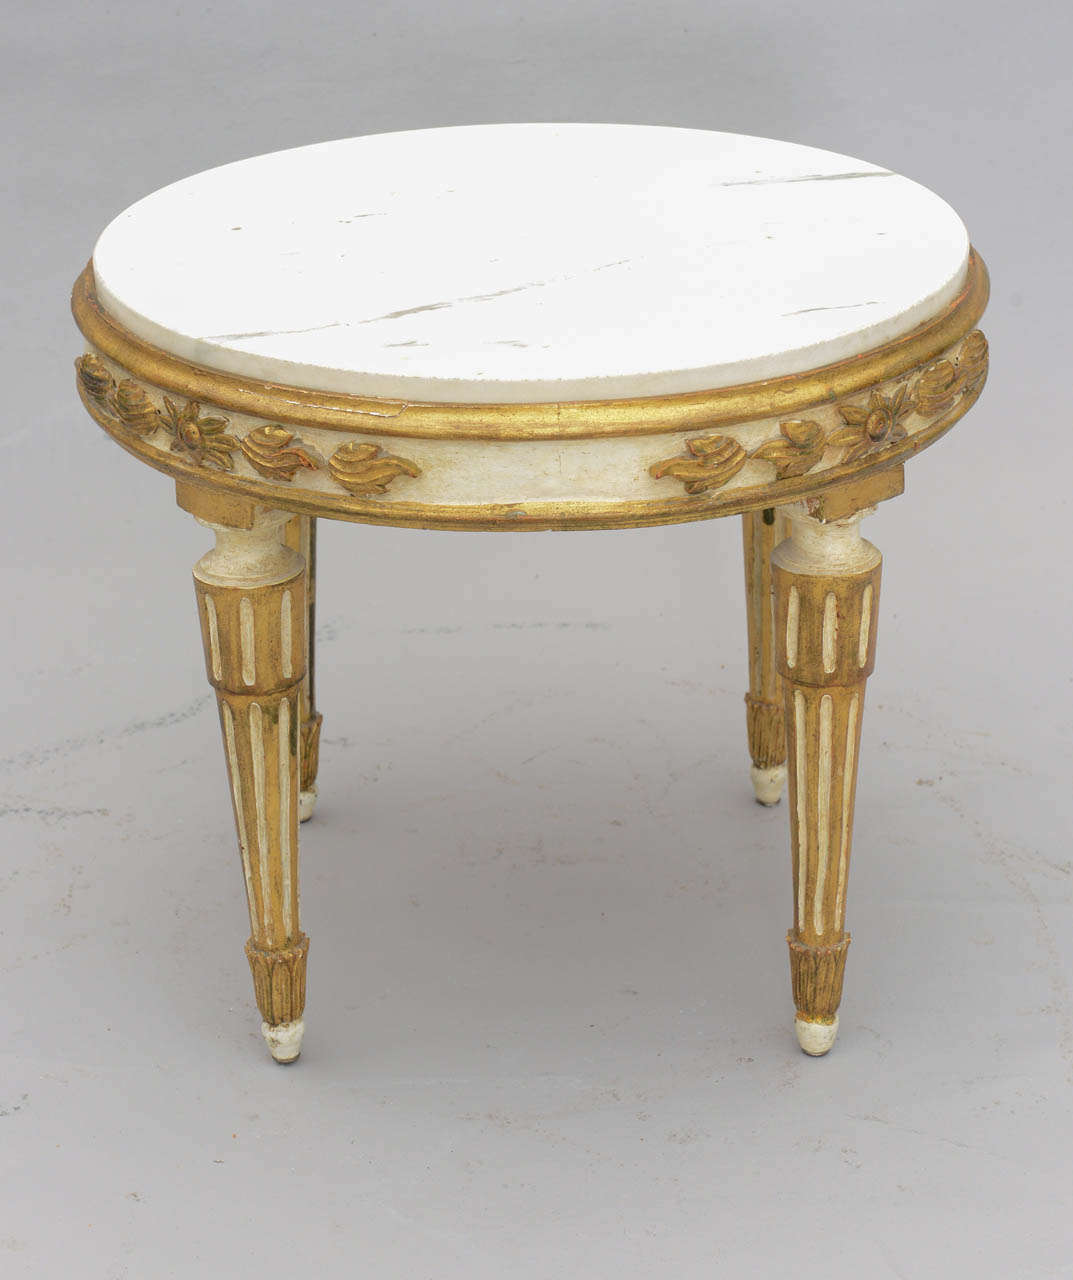 marble top end tables house design french accent table louis xvi giltwood with carrara nate berkus round gold baroque side quilted toppers storage cube coffee glass patio wood leg